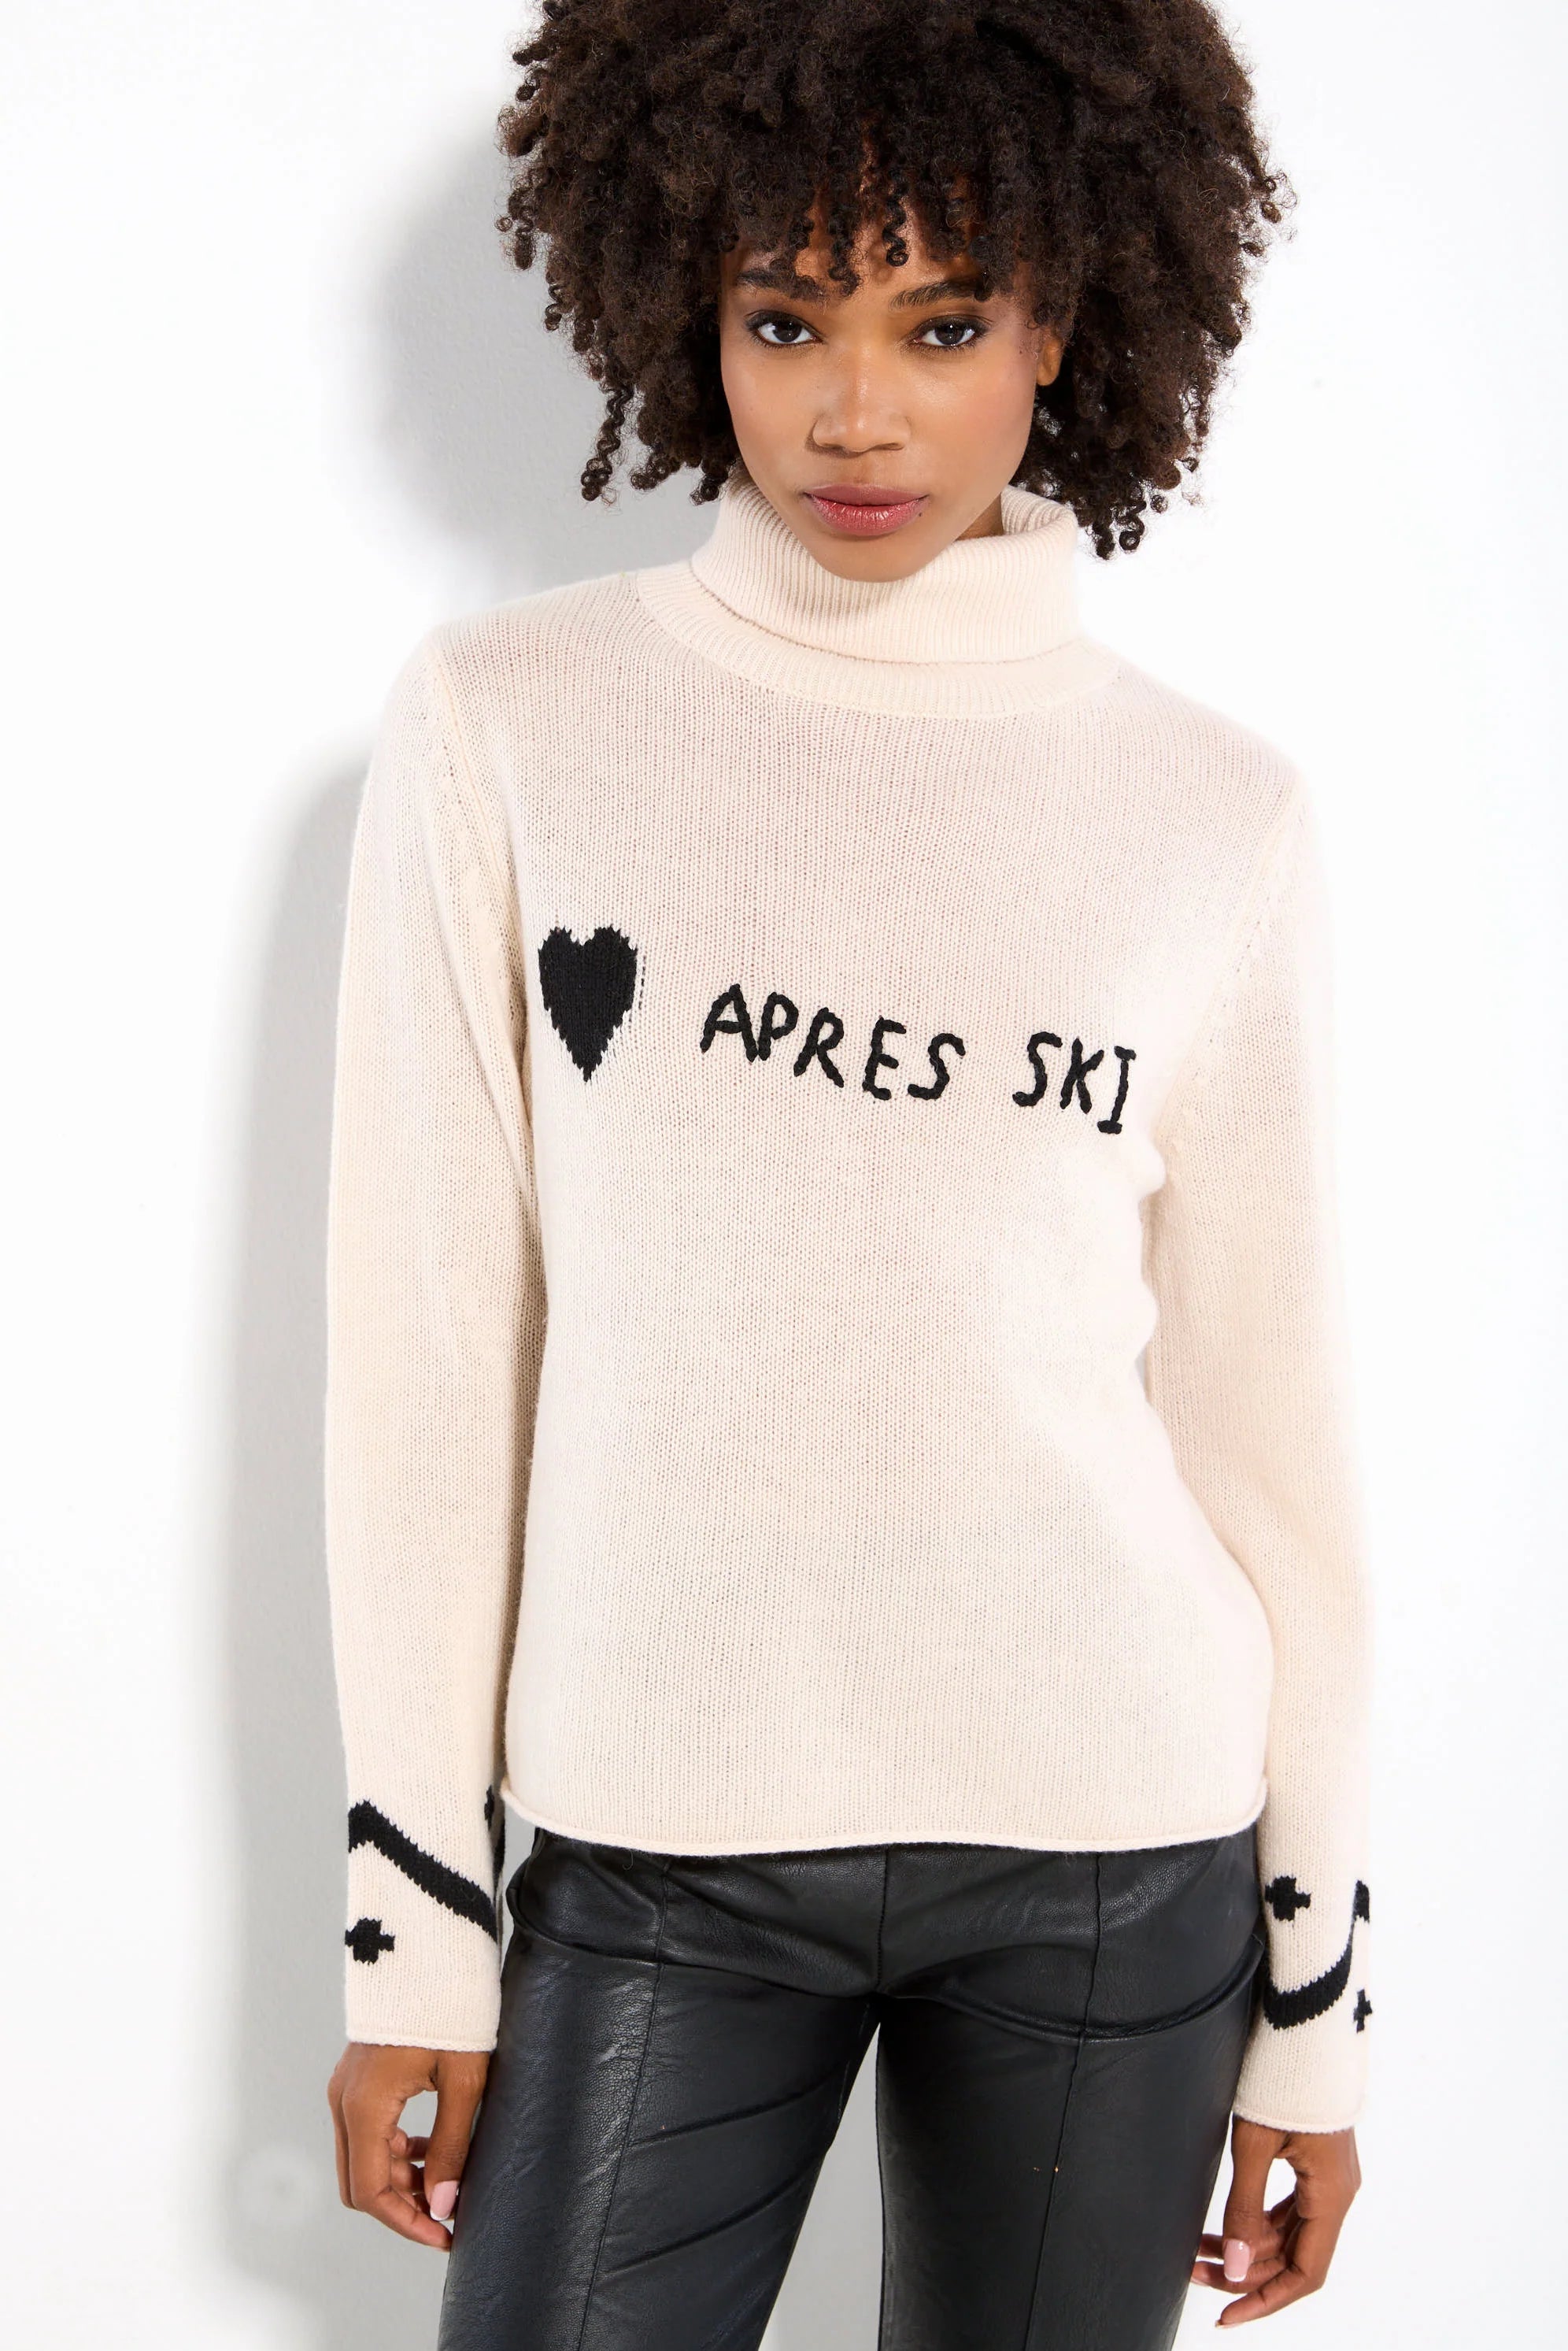 ASOS 4505 ski base layer roll neck long sleeve top in retro graphic print